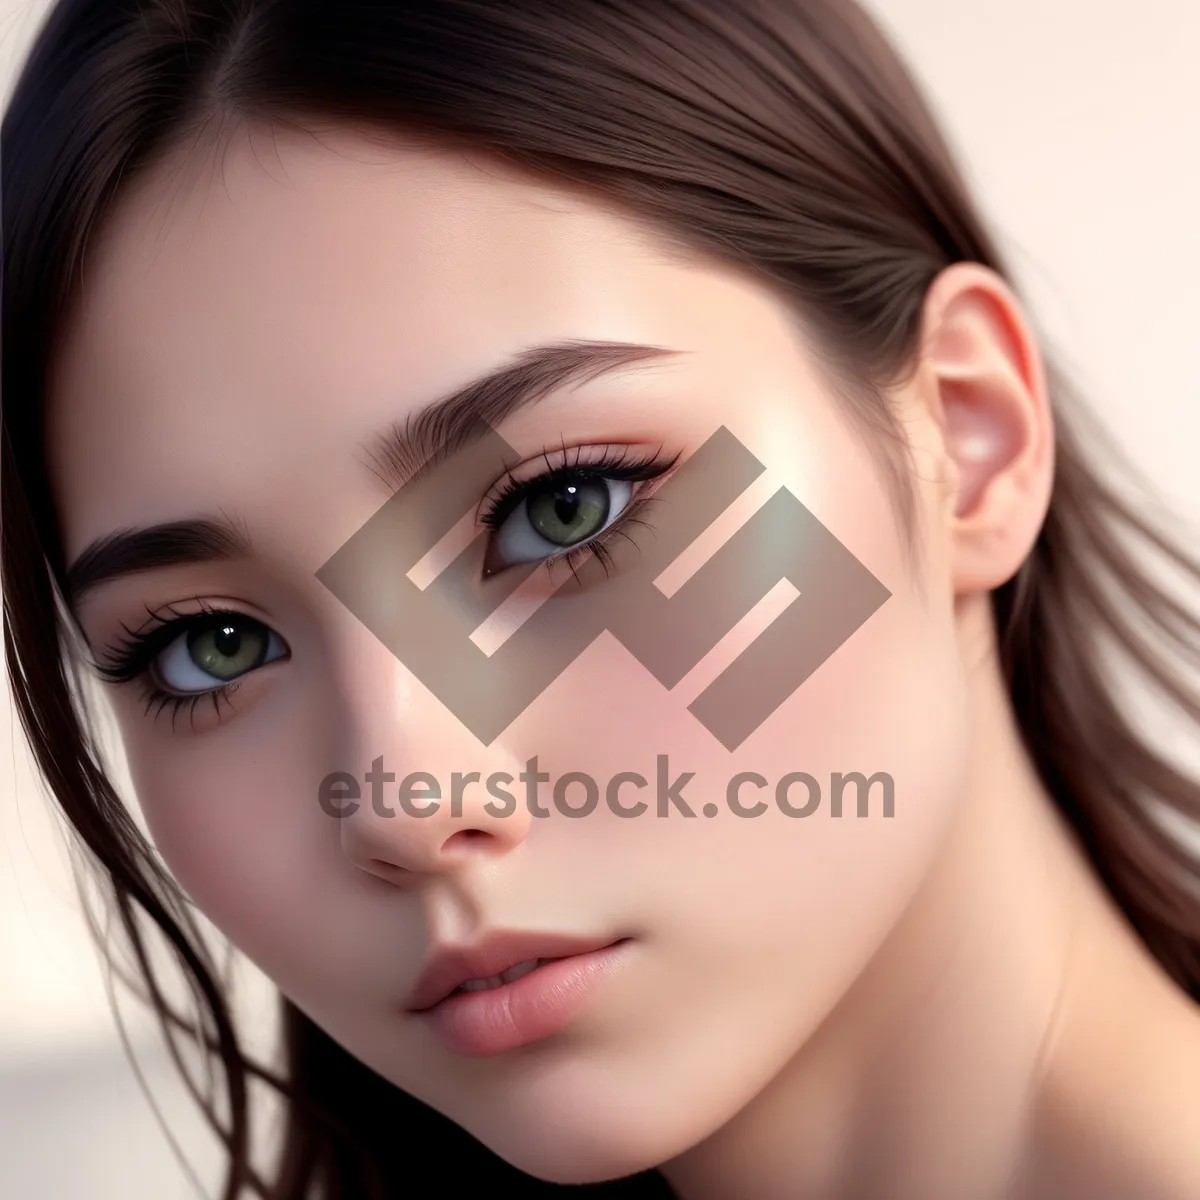 Picture of Fresh-faced Beauty: Alluring Portrait of a Healthy, Attractive Model